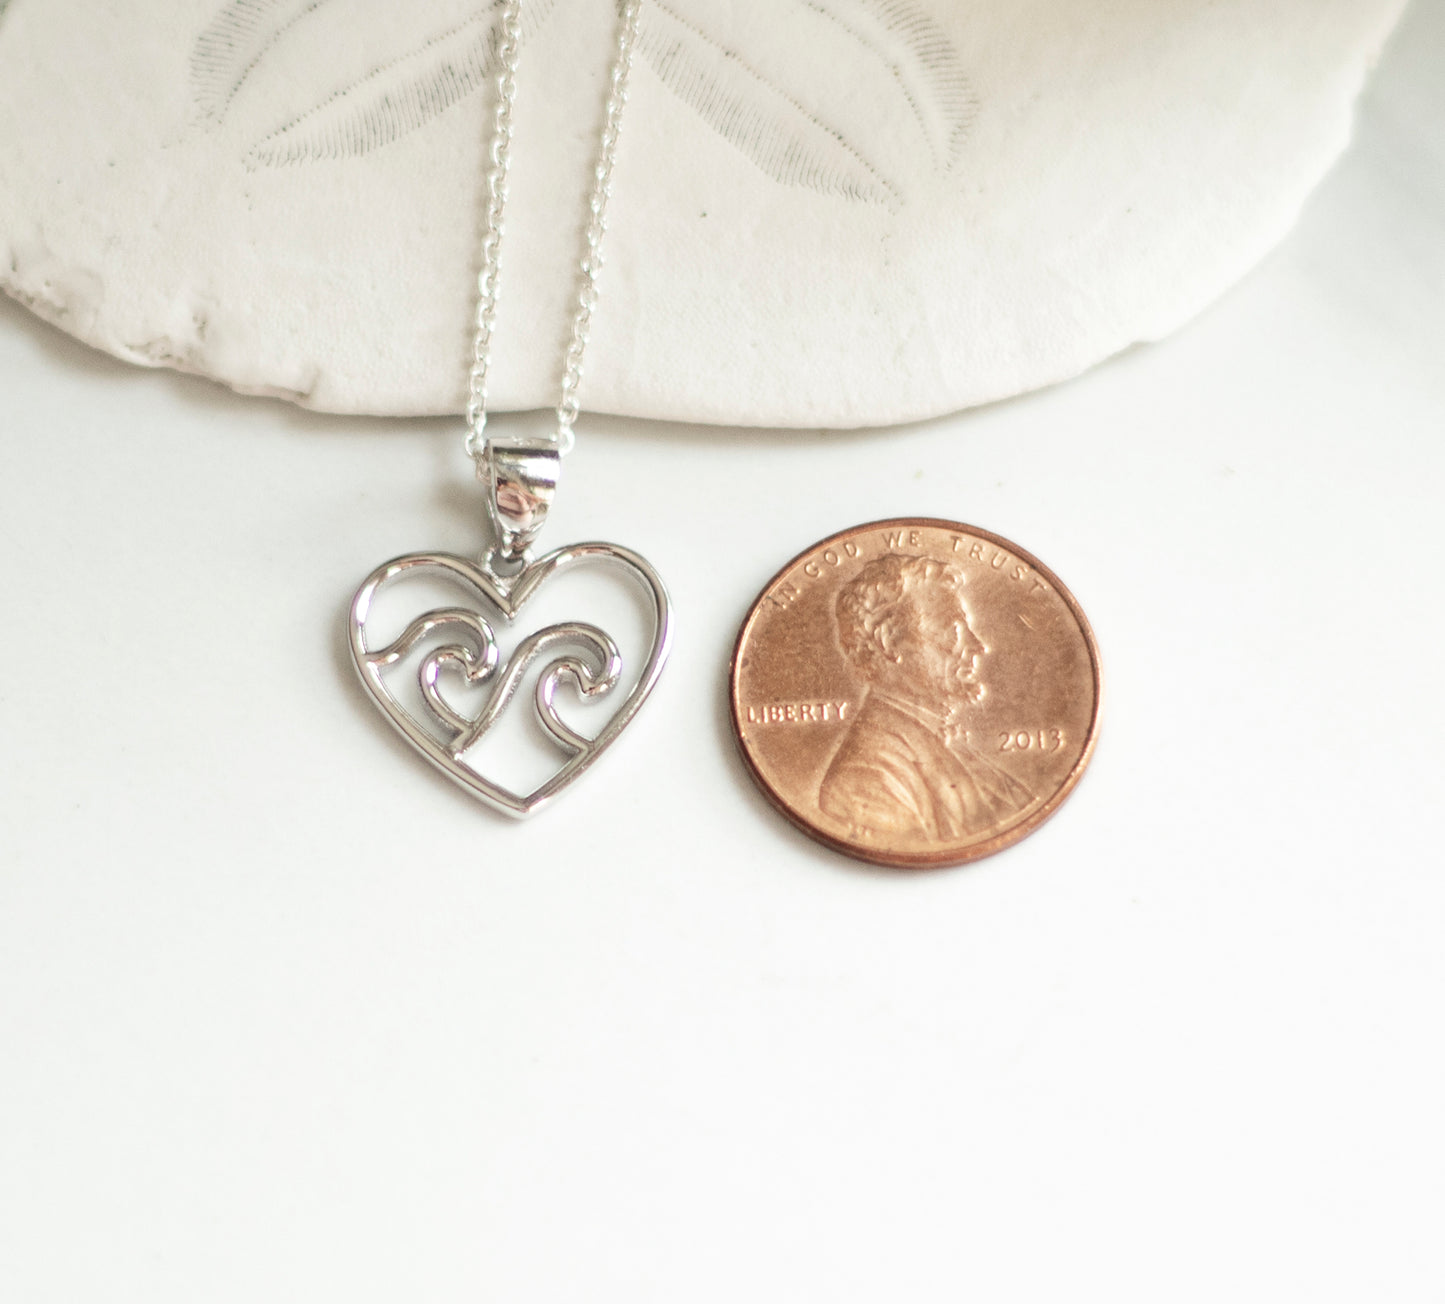 Waves in Heart Necklace